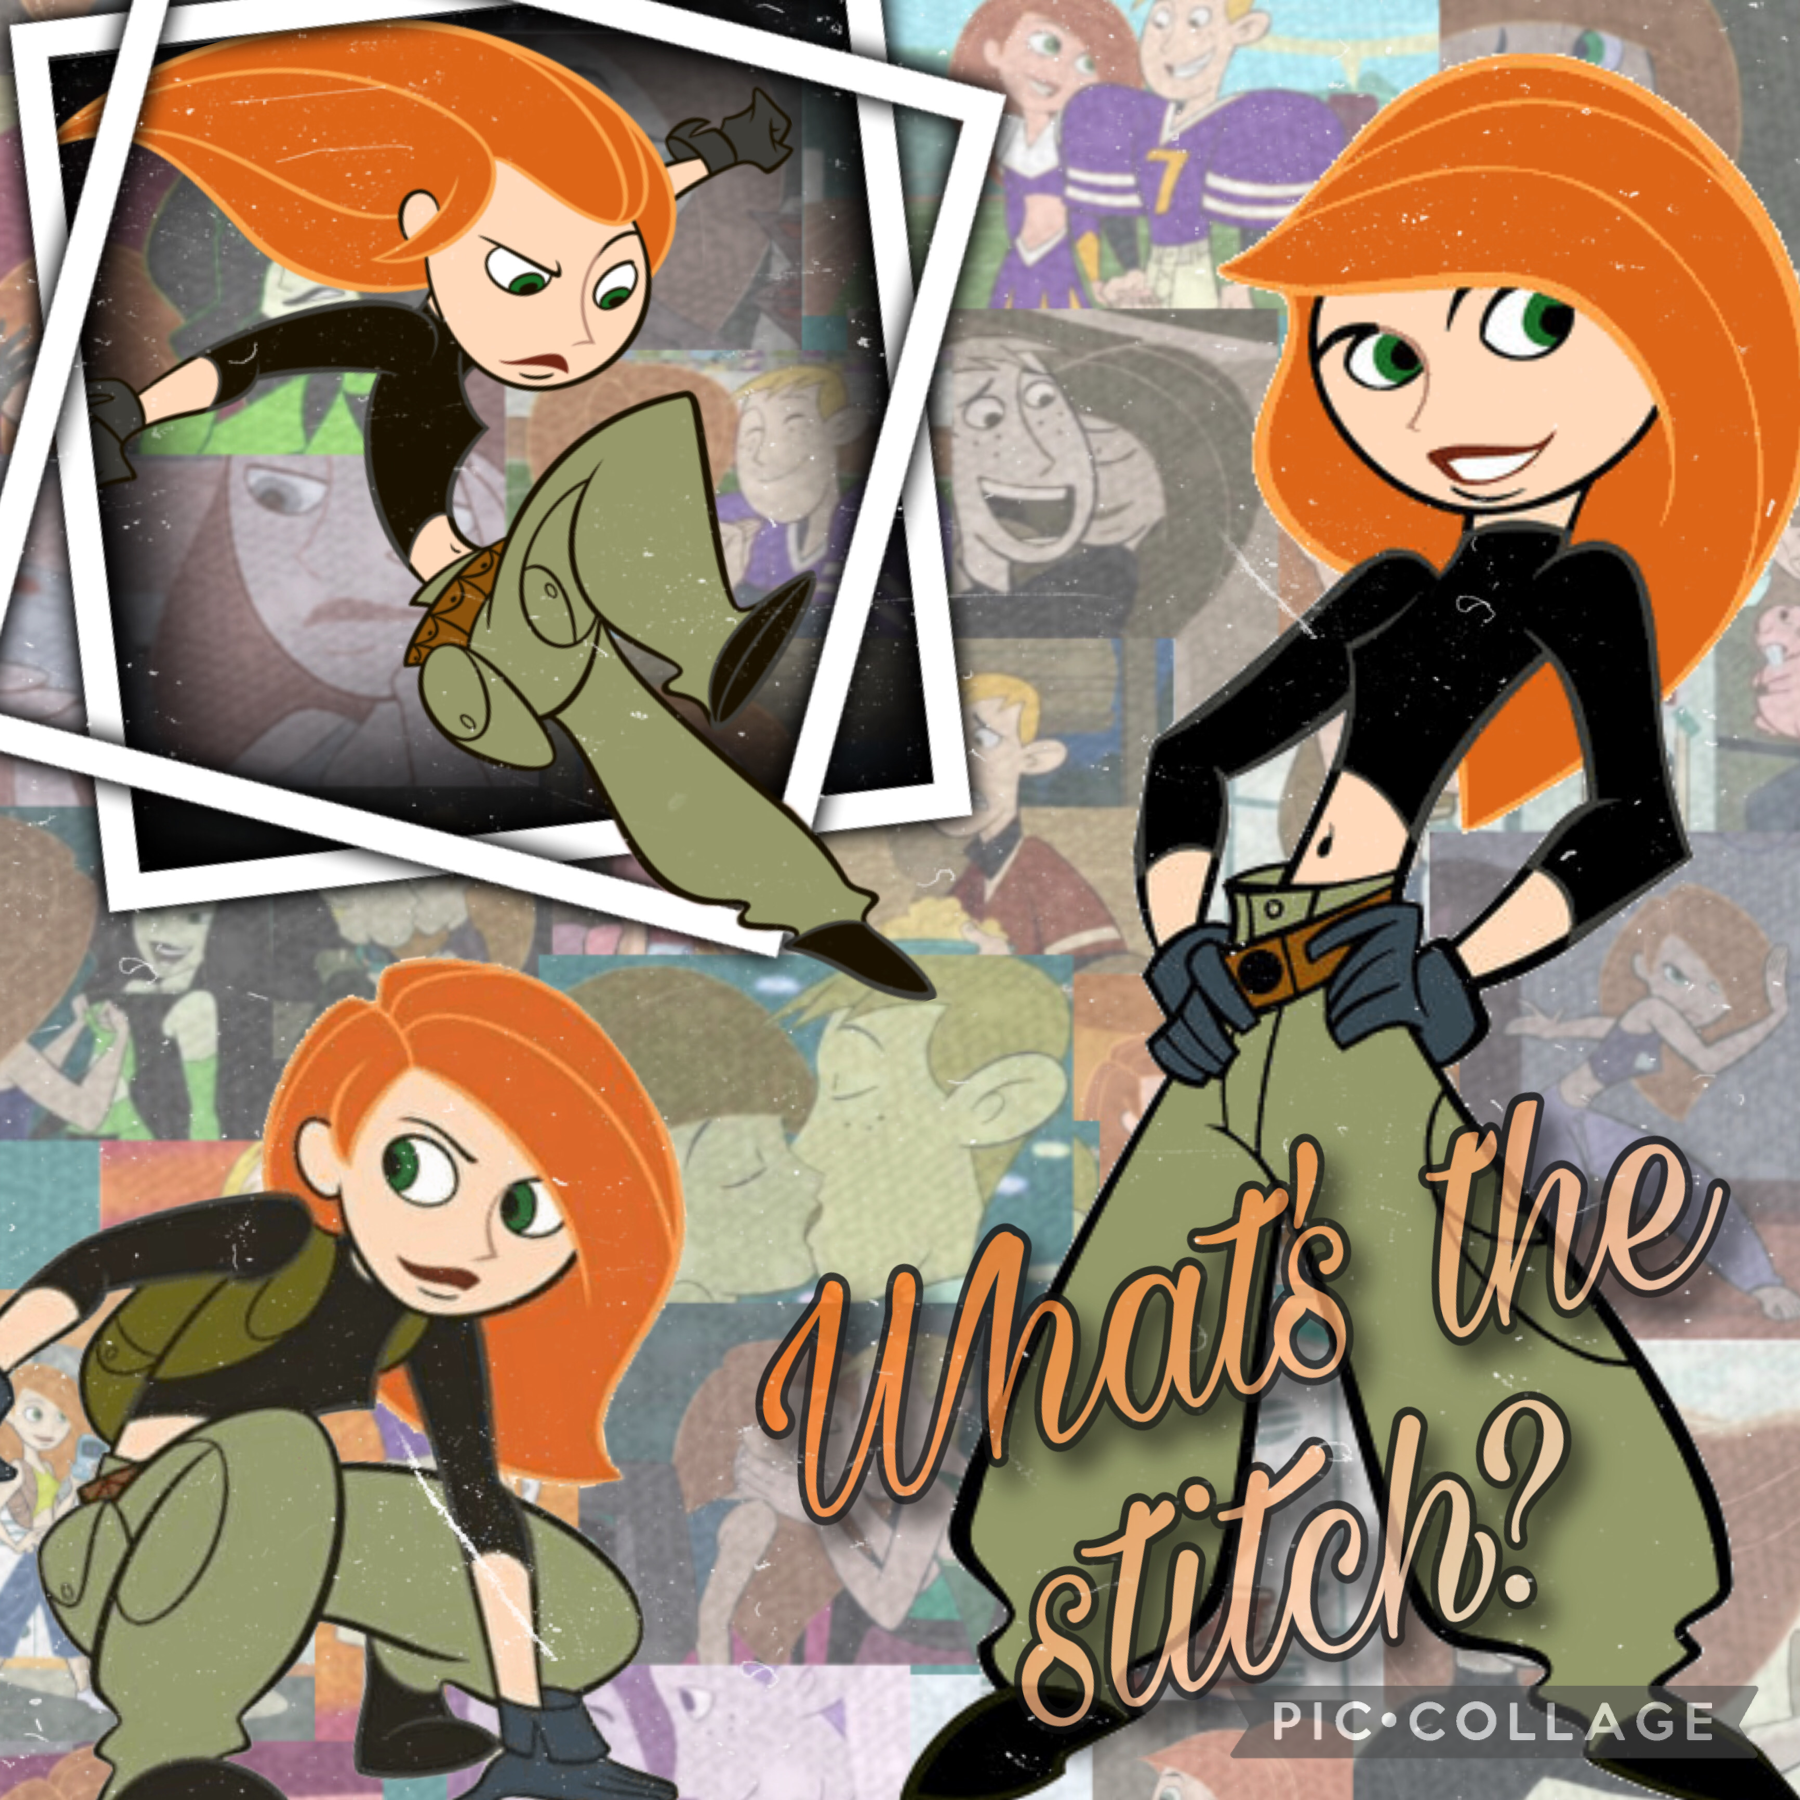 ❤️Kim Possible❤️
Collage requested by _thedarksideofthemoon_